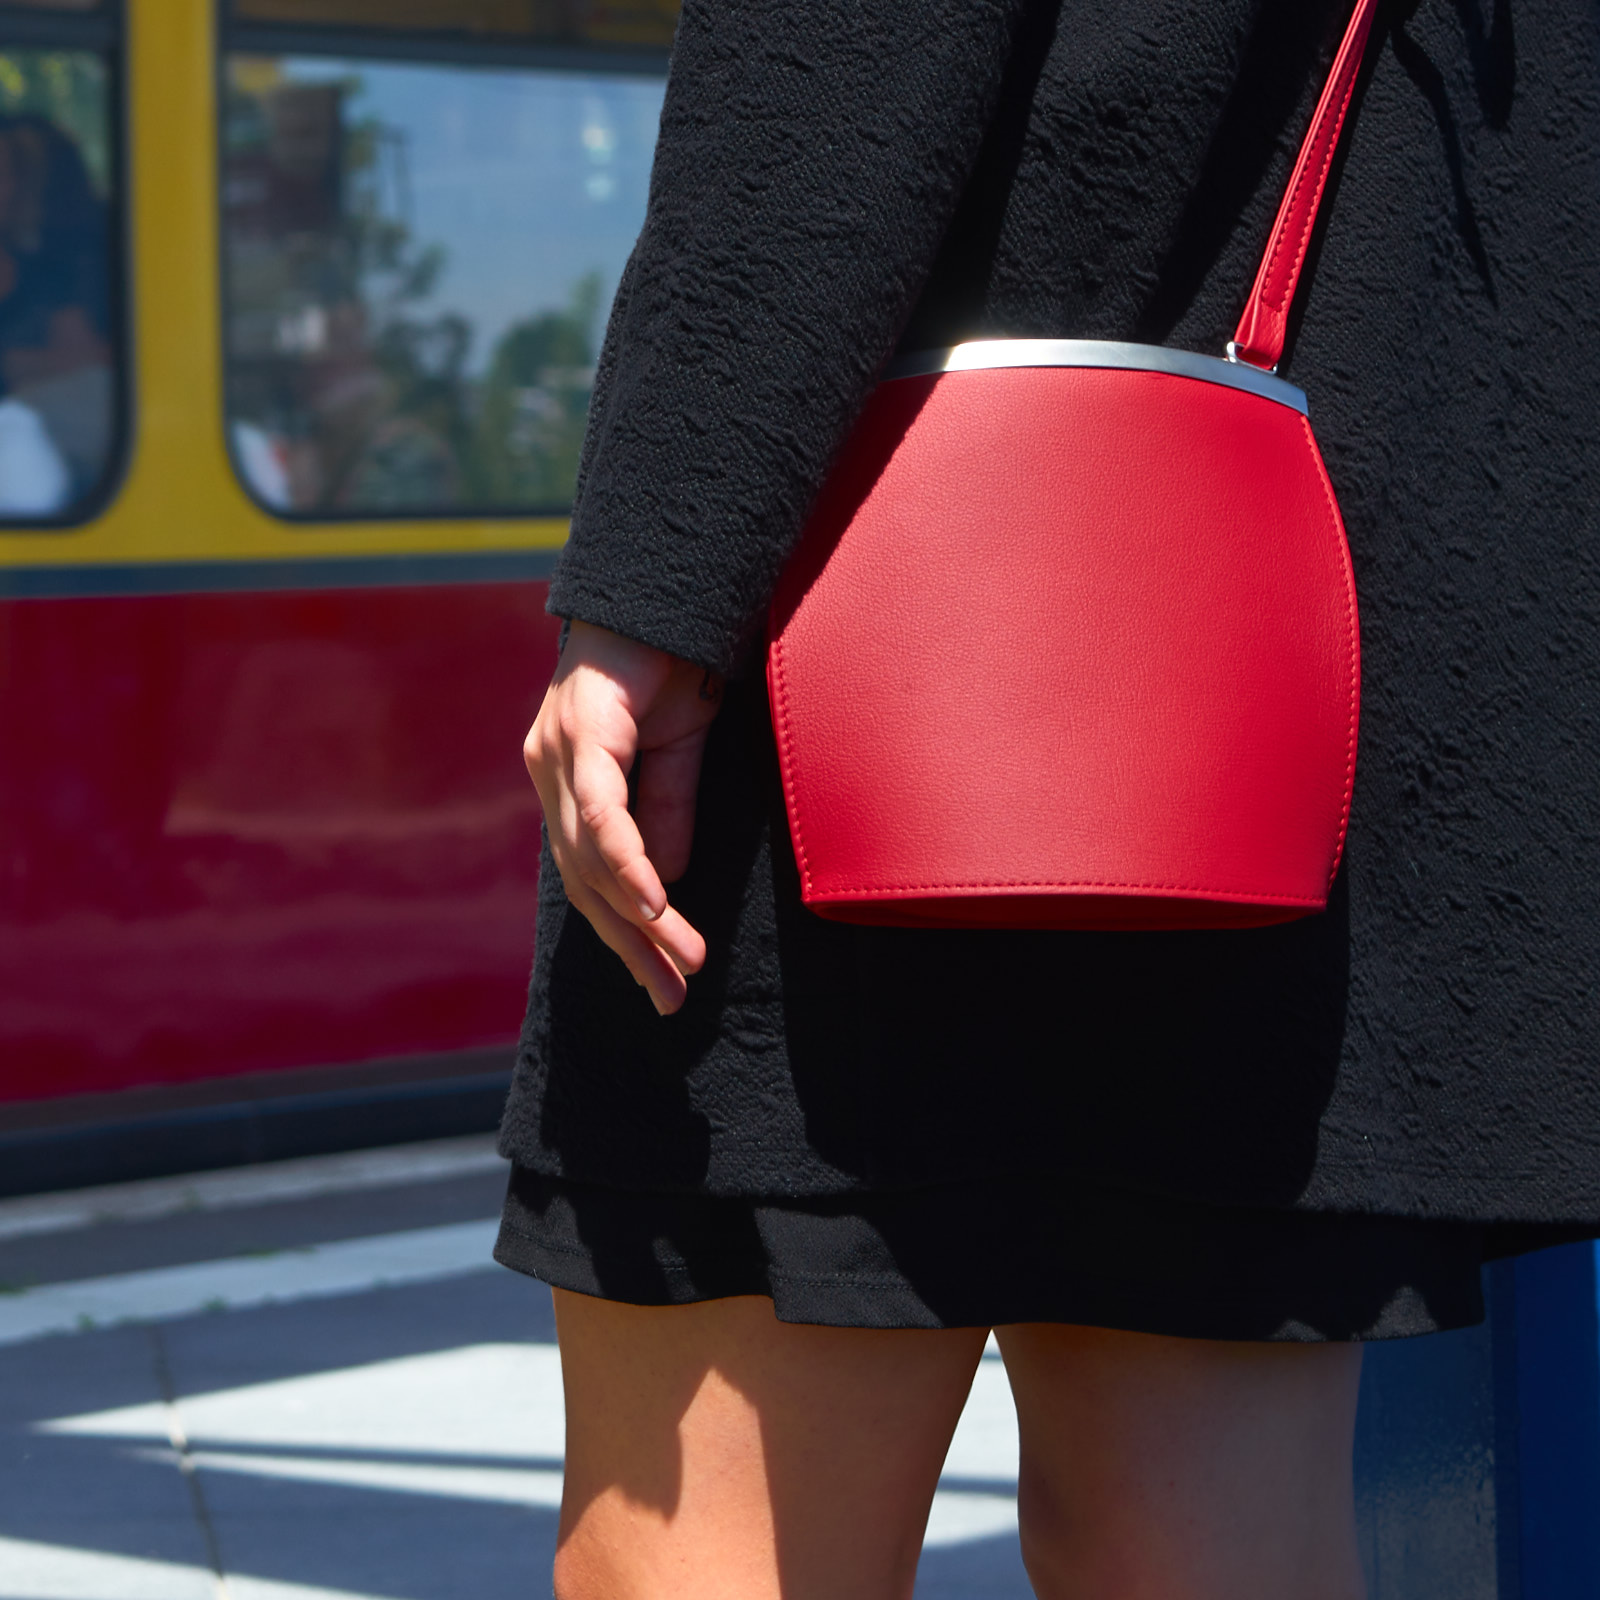 Woman wears Olbrish handbag Arcade in red nappa leather at an S-Bahn station in Berlin